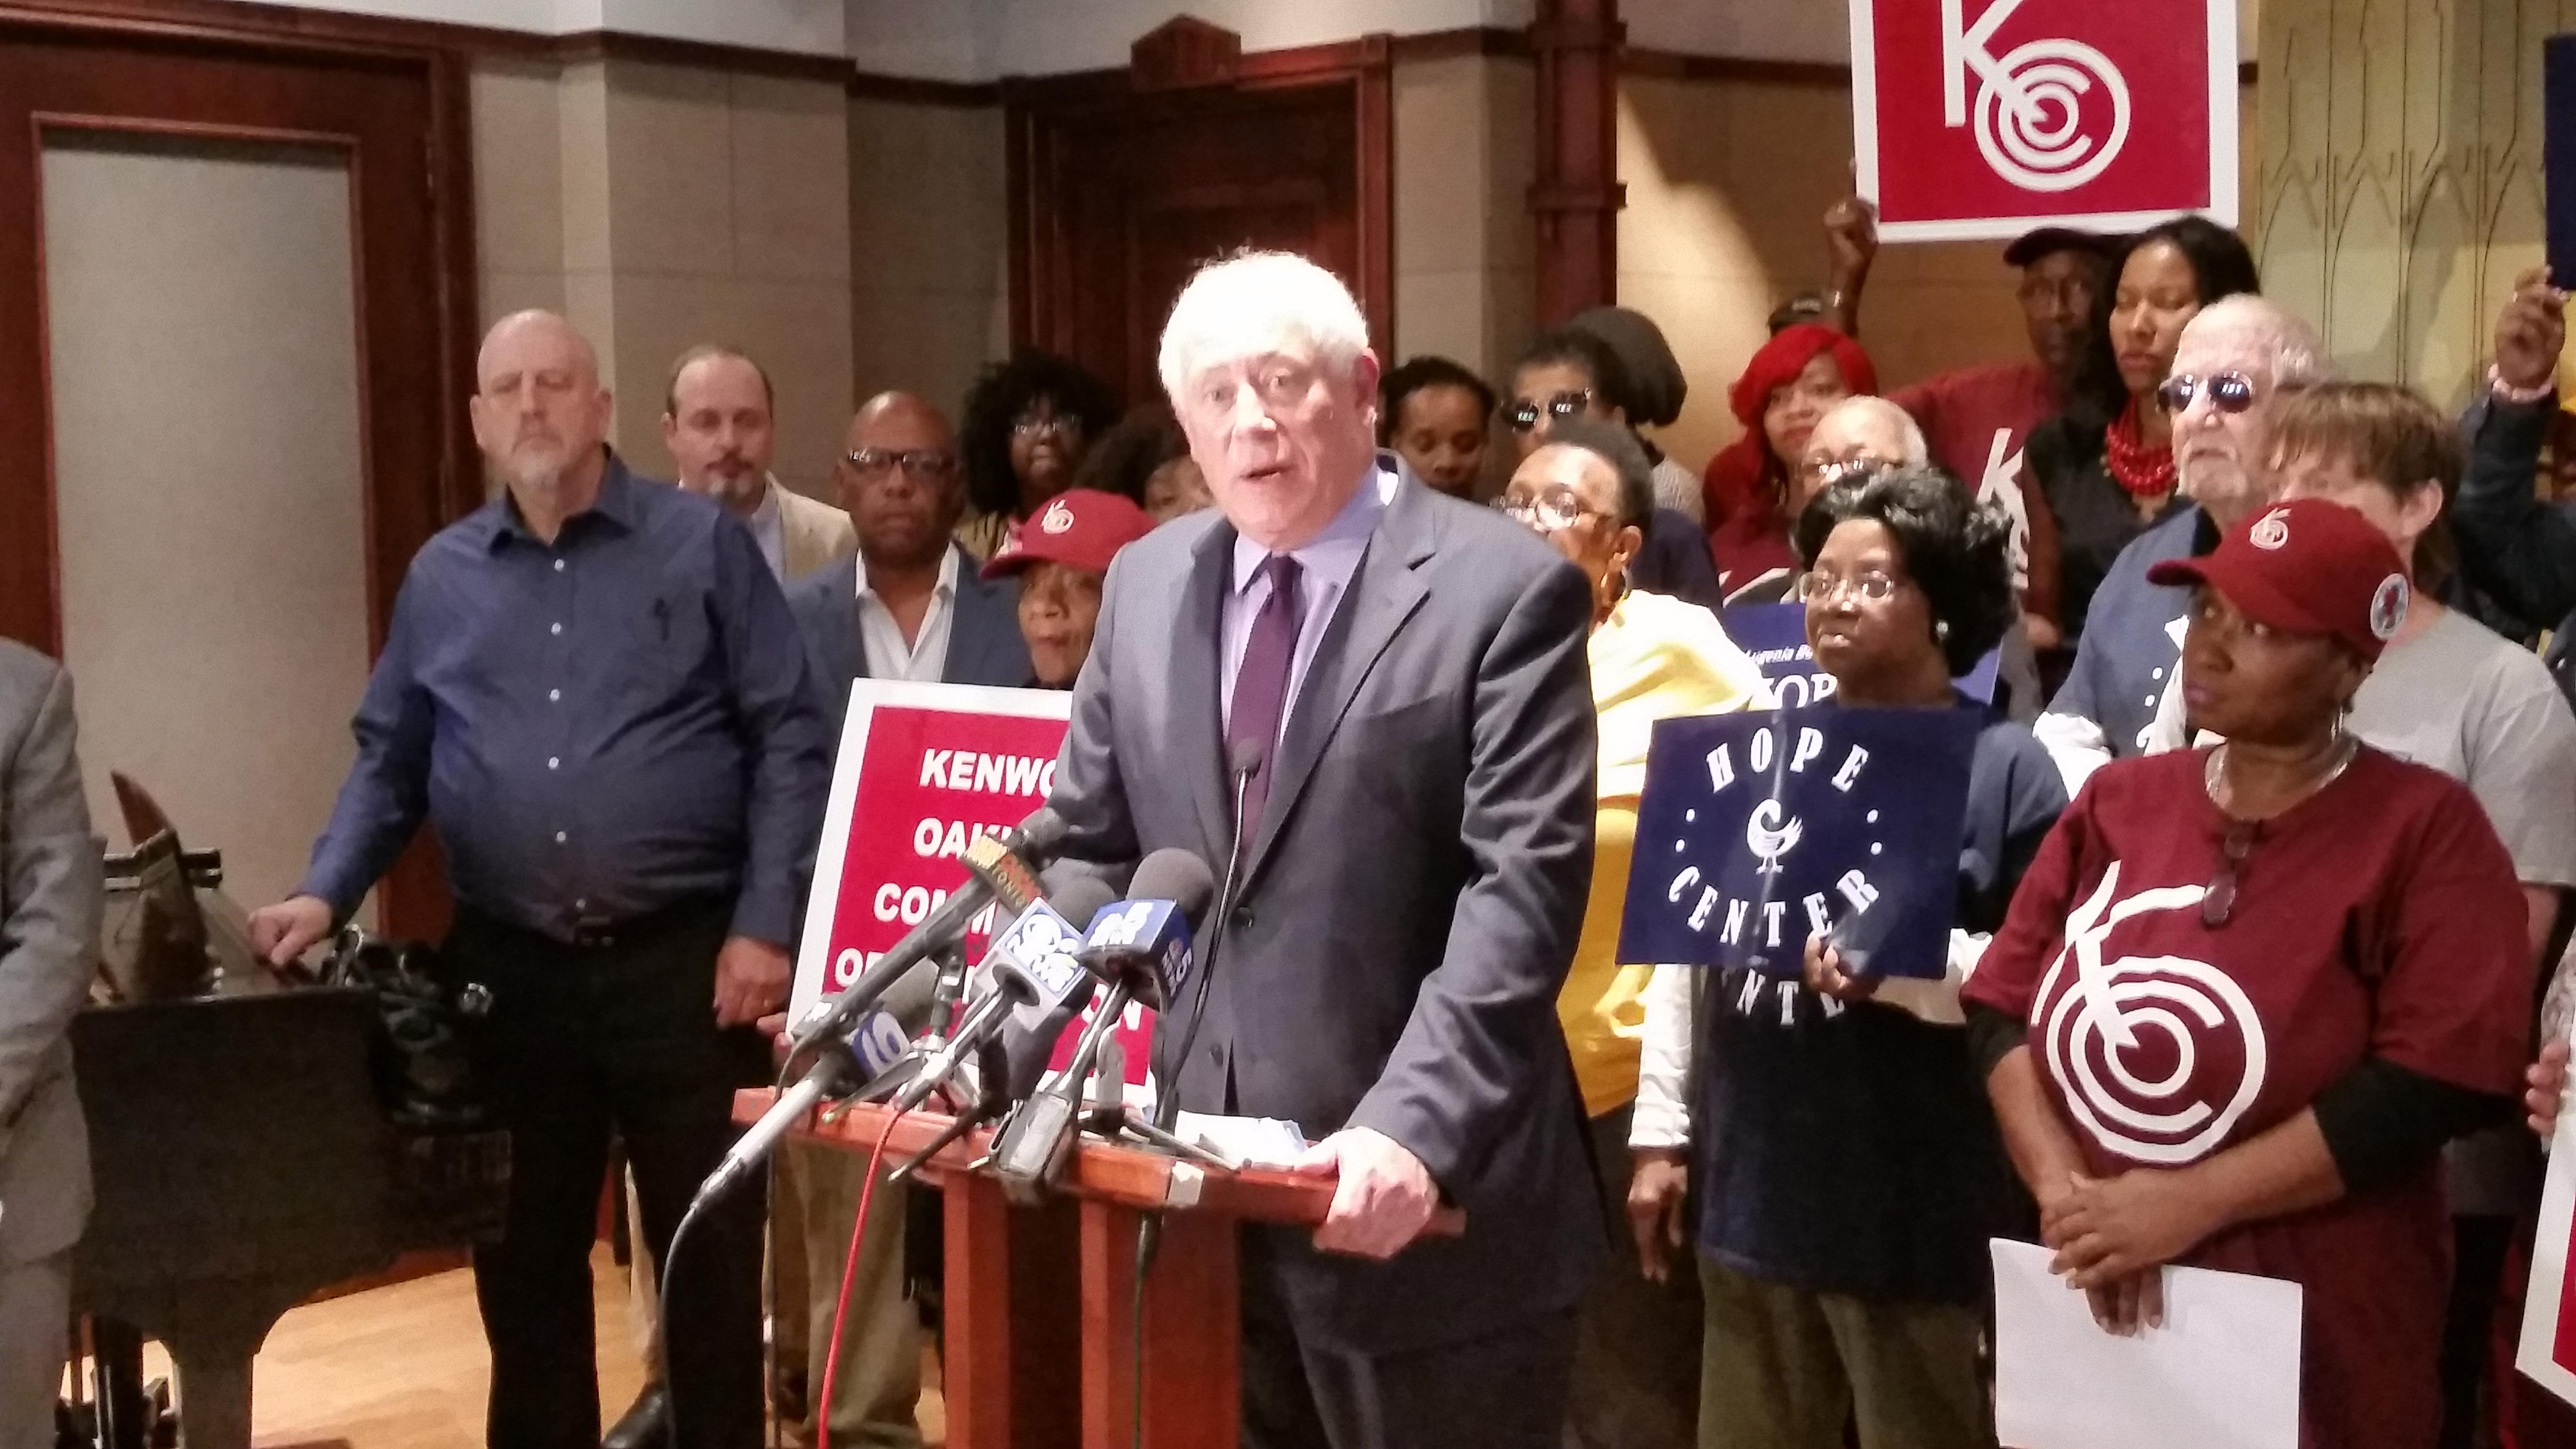 Former Gov. Pat Quinn is one of seven plaintiffs in a pair of civil suits filed this week calling for an end to mayoral control of the Chicago Board of Education. (Matt Masterson / Chicago Tonight)